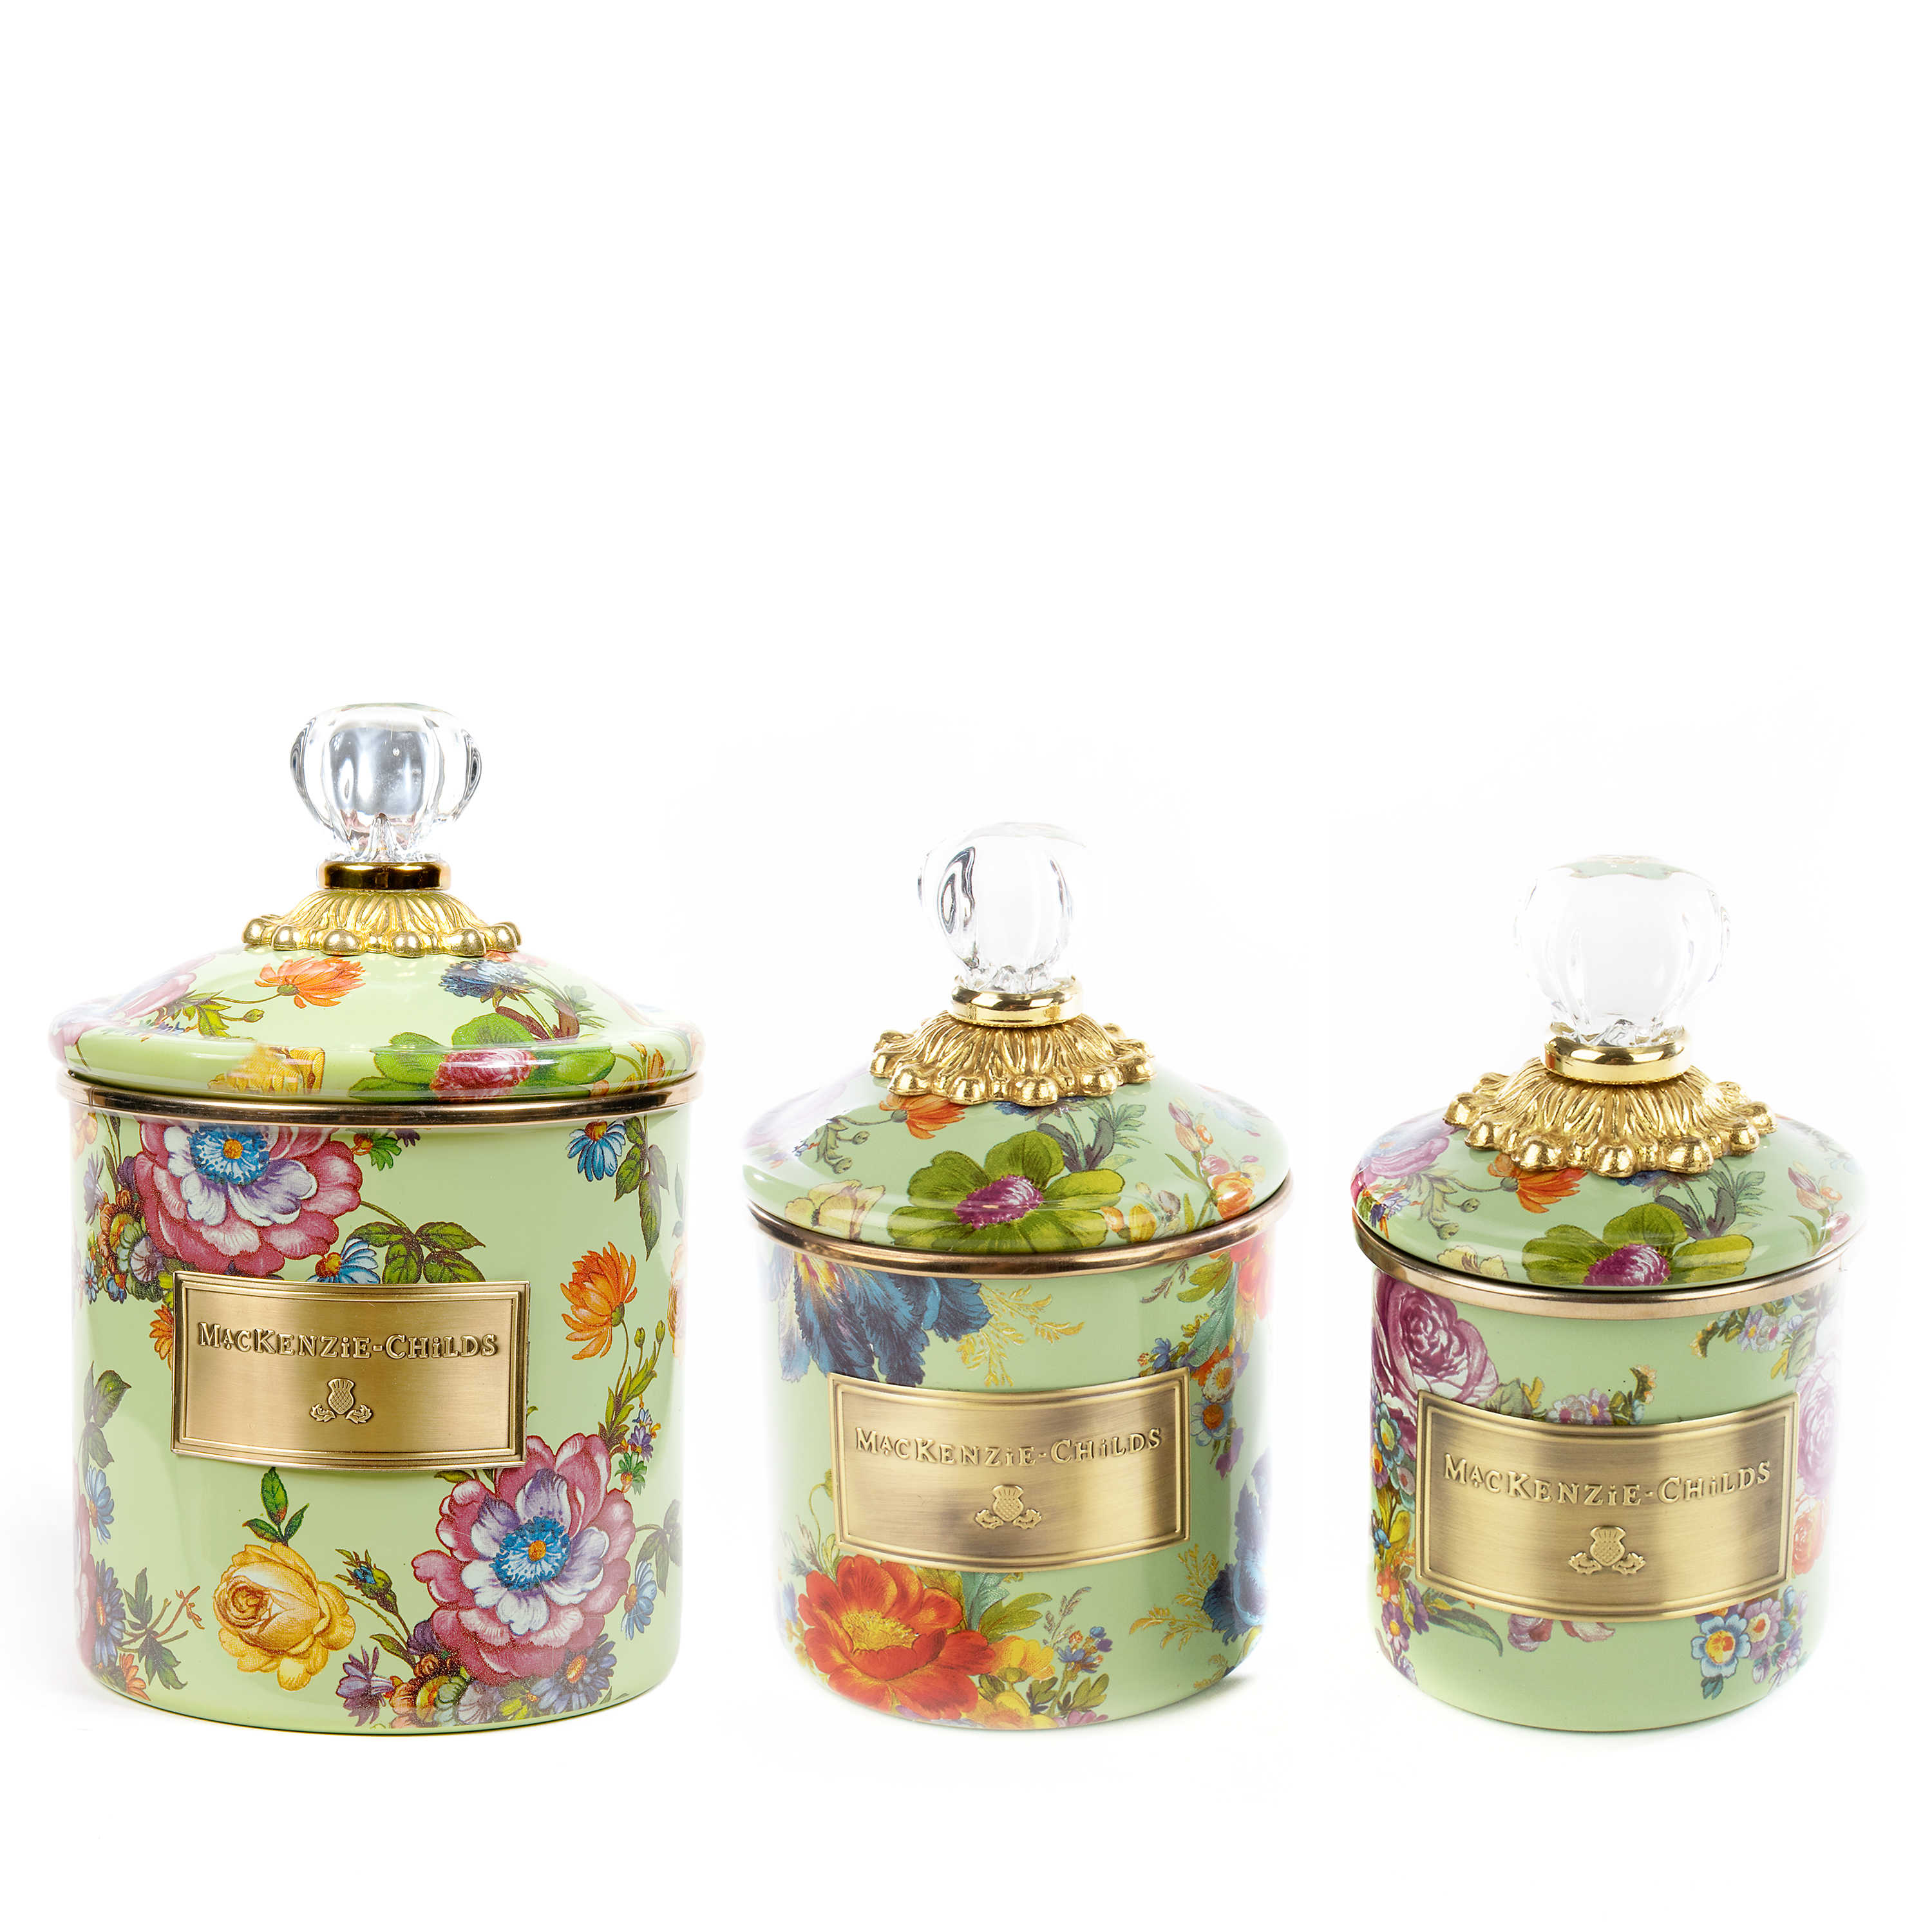 Green Flower Market Little Canisters, Set of 3 mackenzie-childs Panama 0